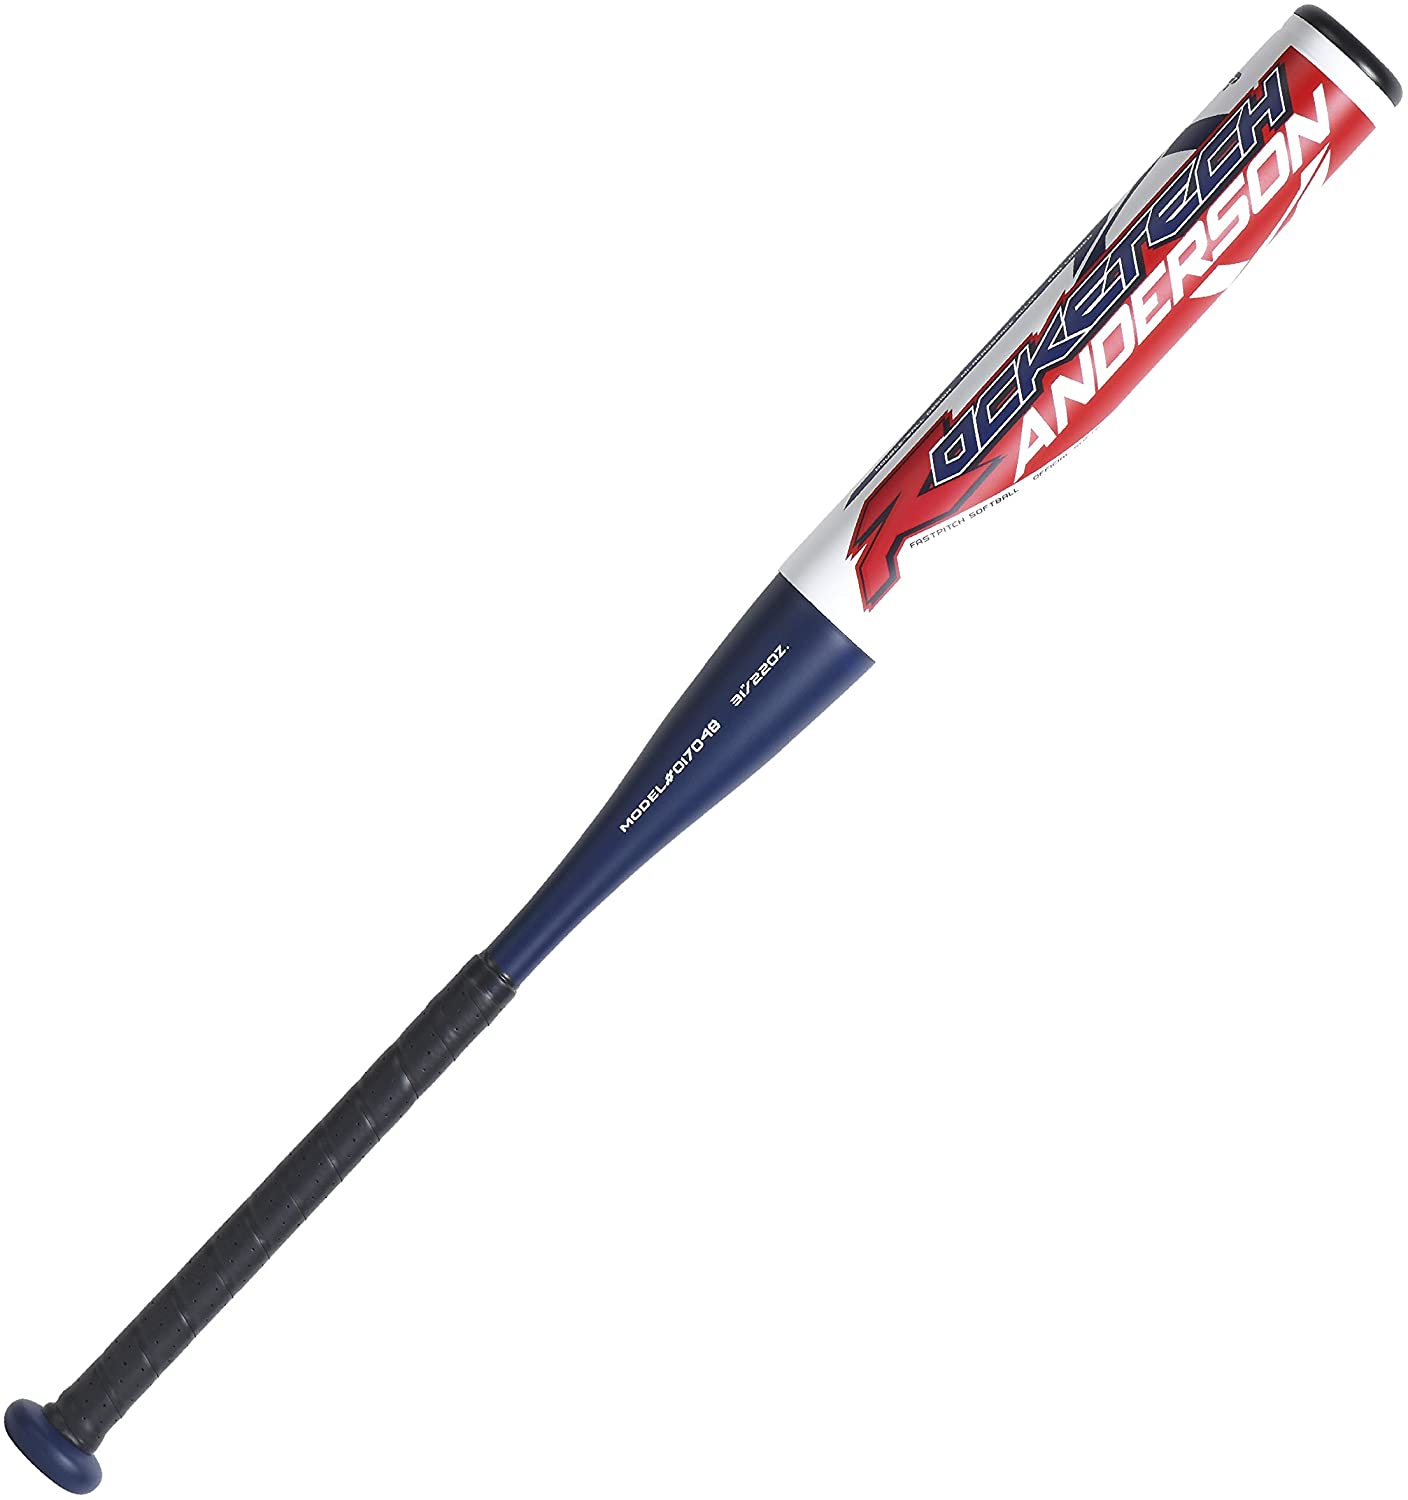 anderson-rocketech-9-aluminum-fastpitch-softball-bat-33-inch-24-oz 017048-3324 Anderson       For over 15 years the Anderson